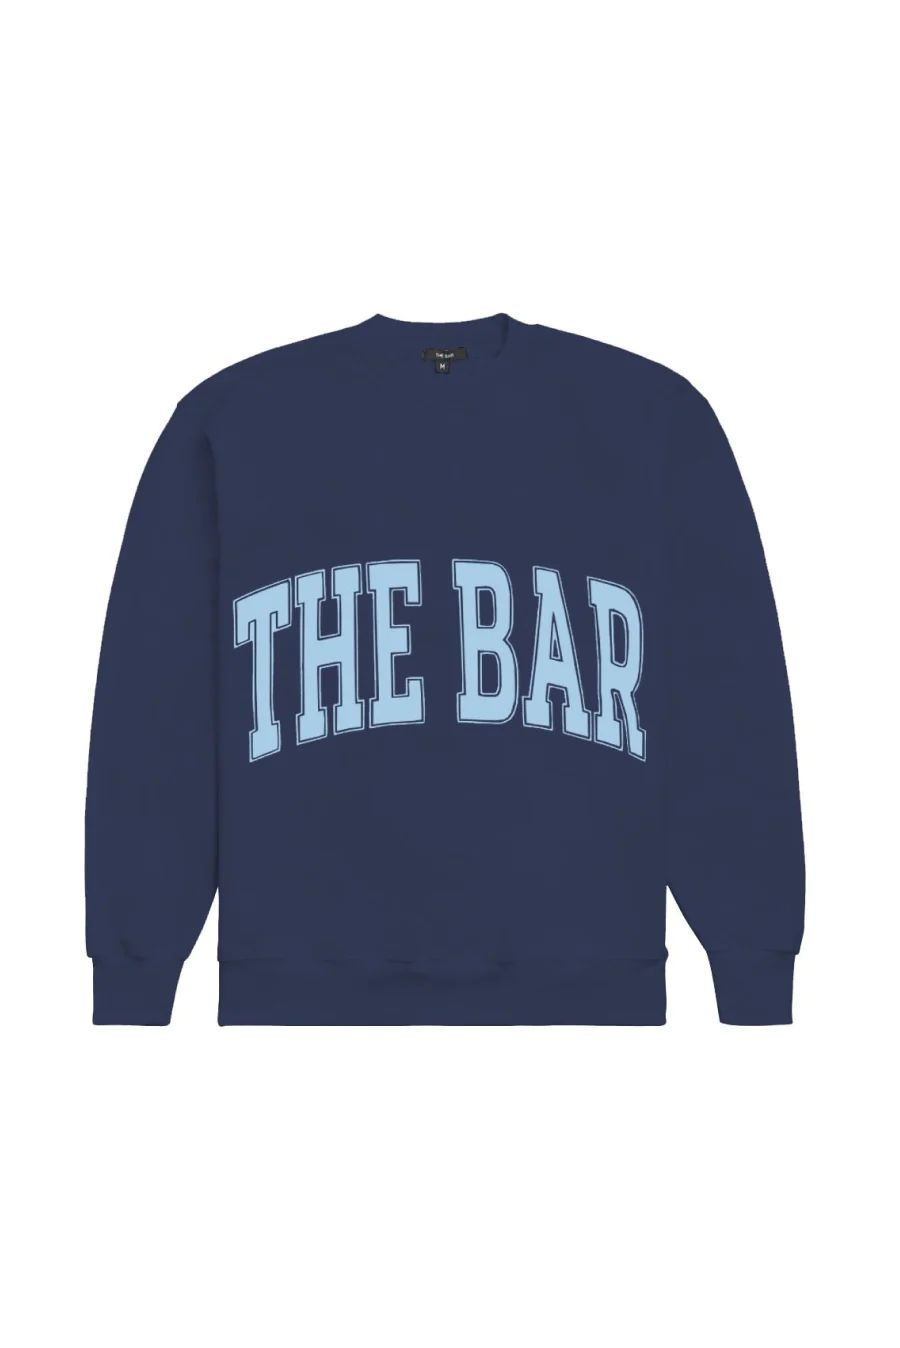 The Varsity Collection | The Bar